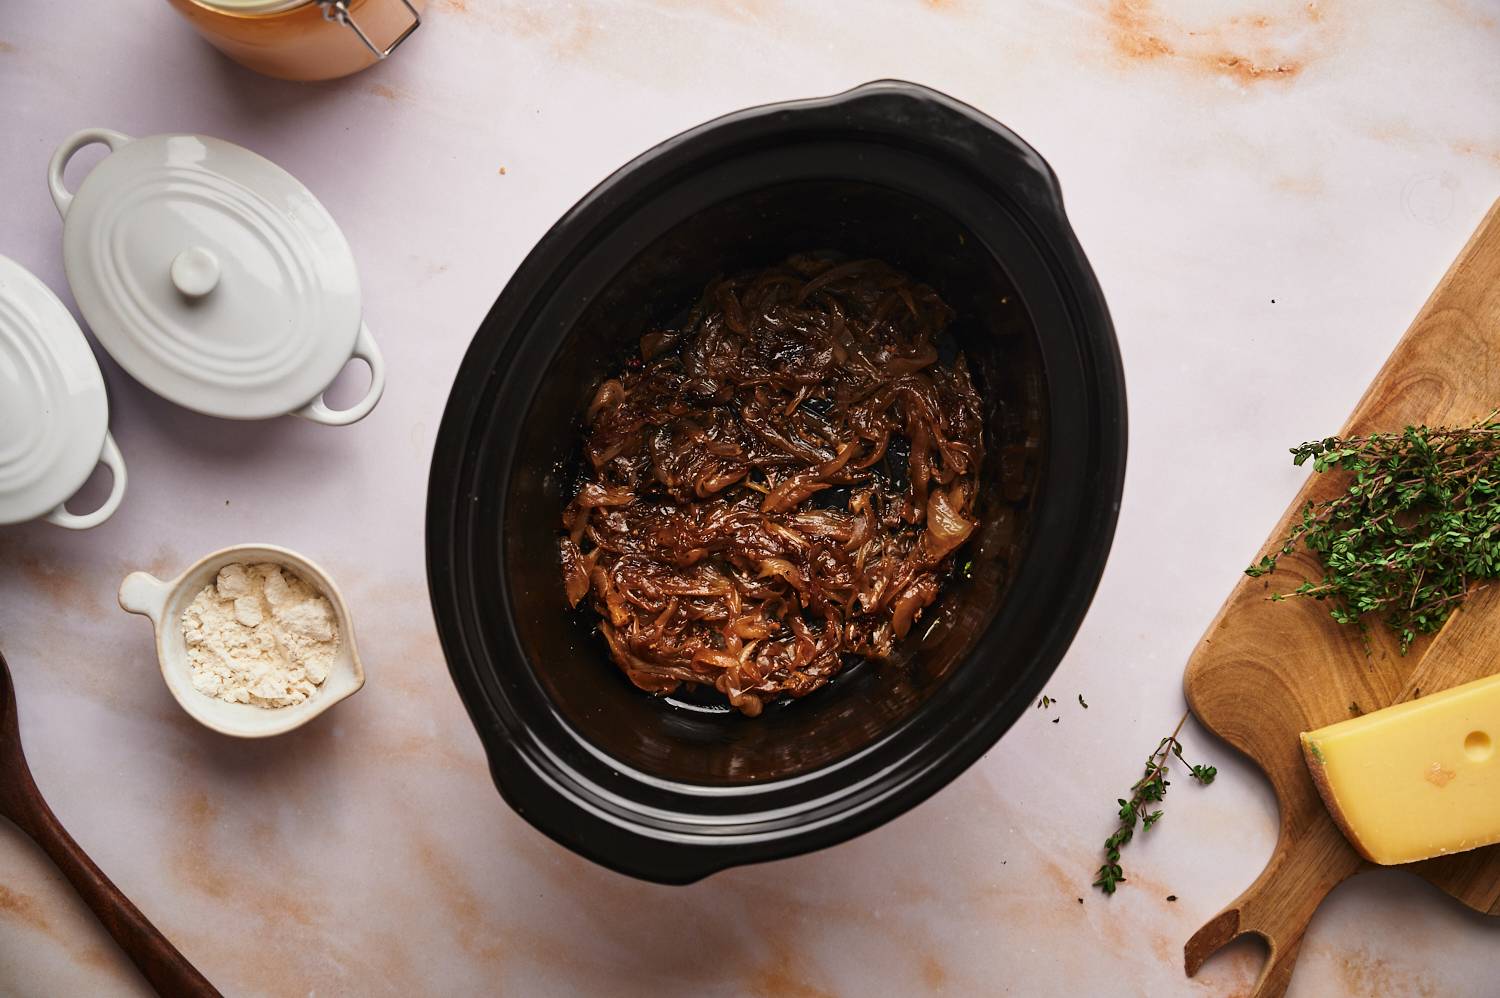 Caramelized onions in a slow cooker for French onion soup.